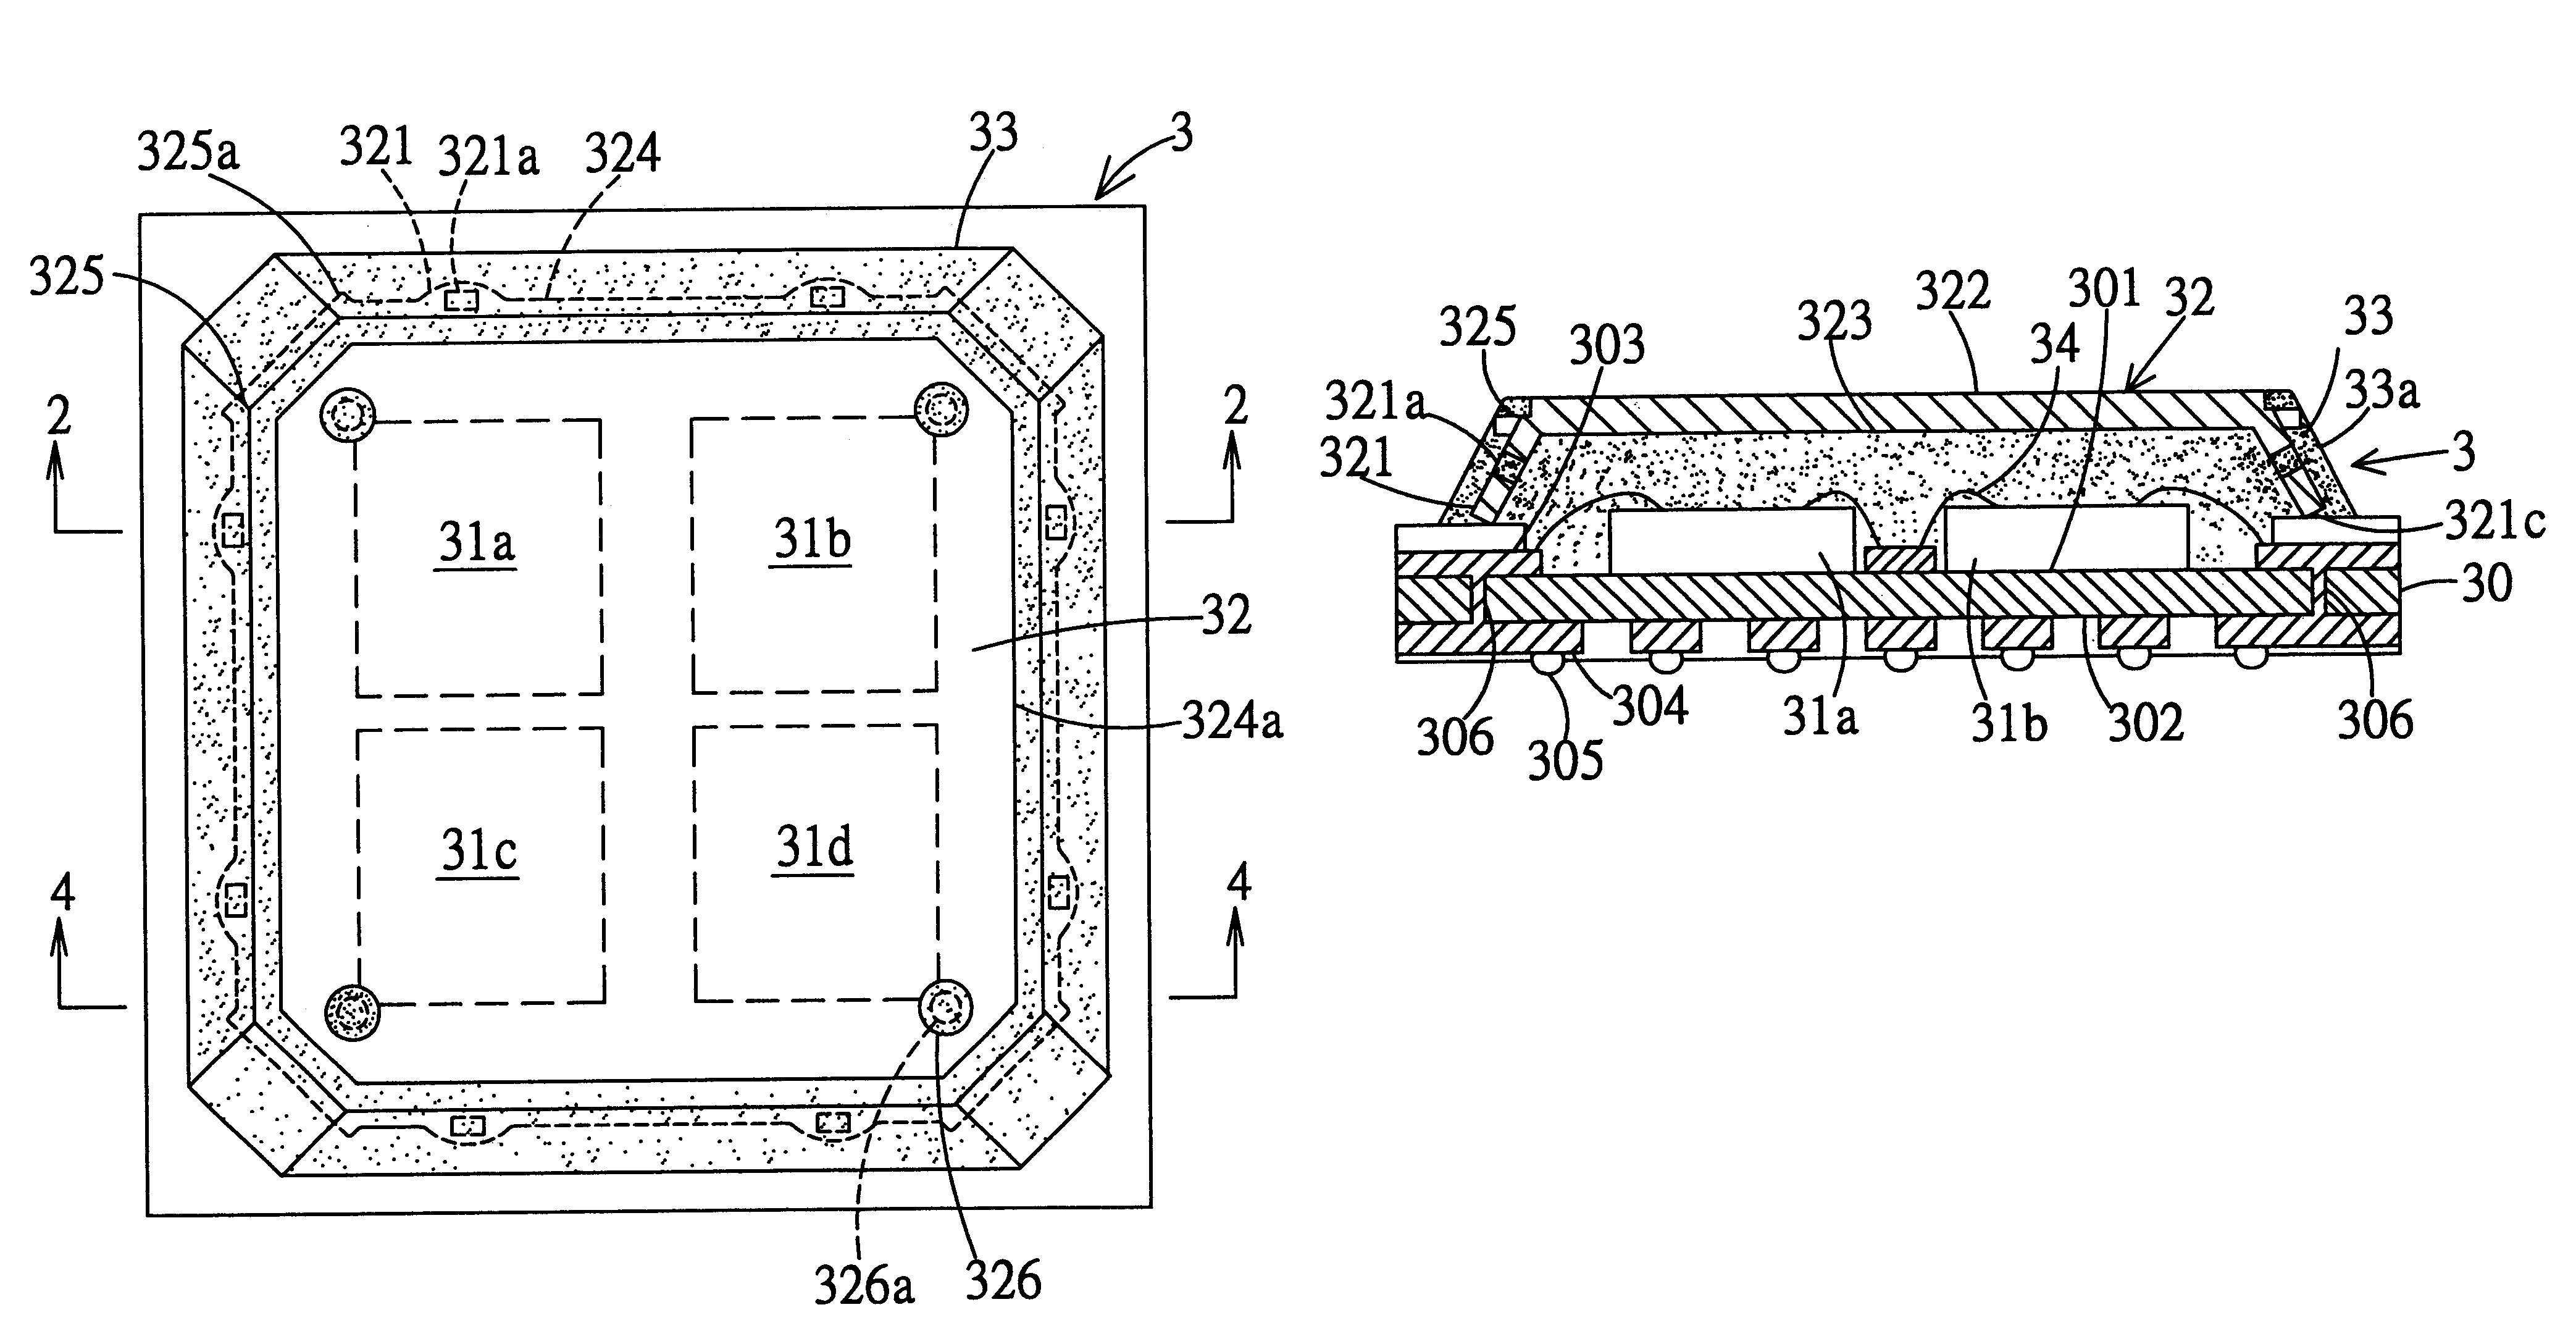 Semiconductor package having a heat sink with an exposed surface